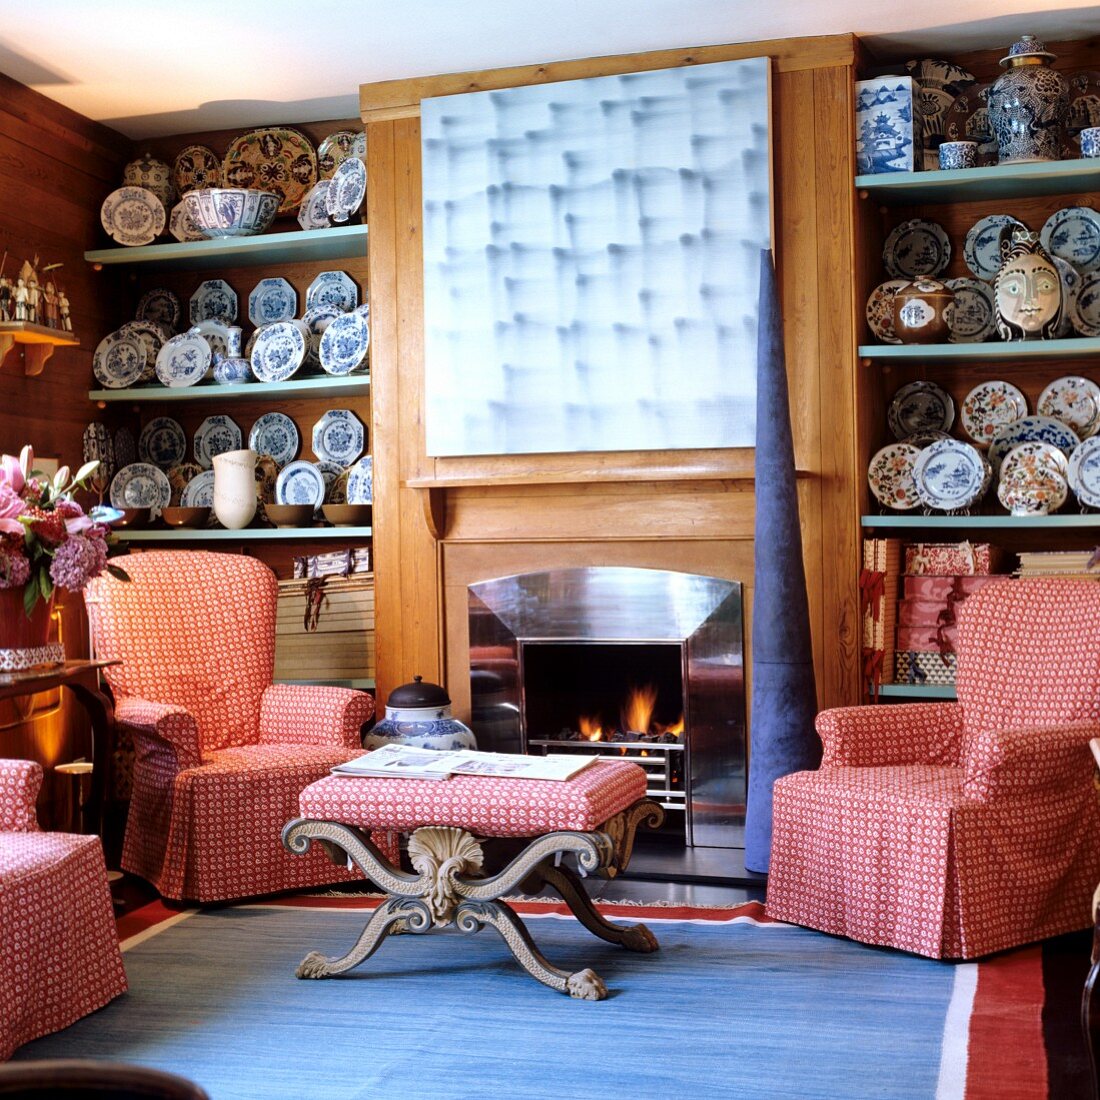 Corner of traditional living room - armchairs with checked loose covers and matching ottoman in front of fireplace flanked by shelves of decorative plates